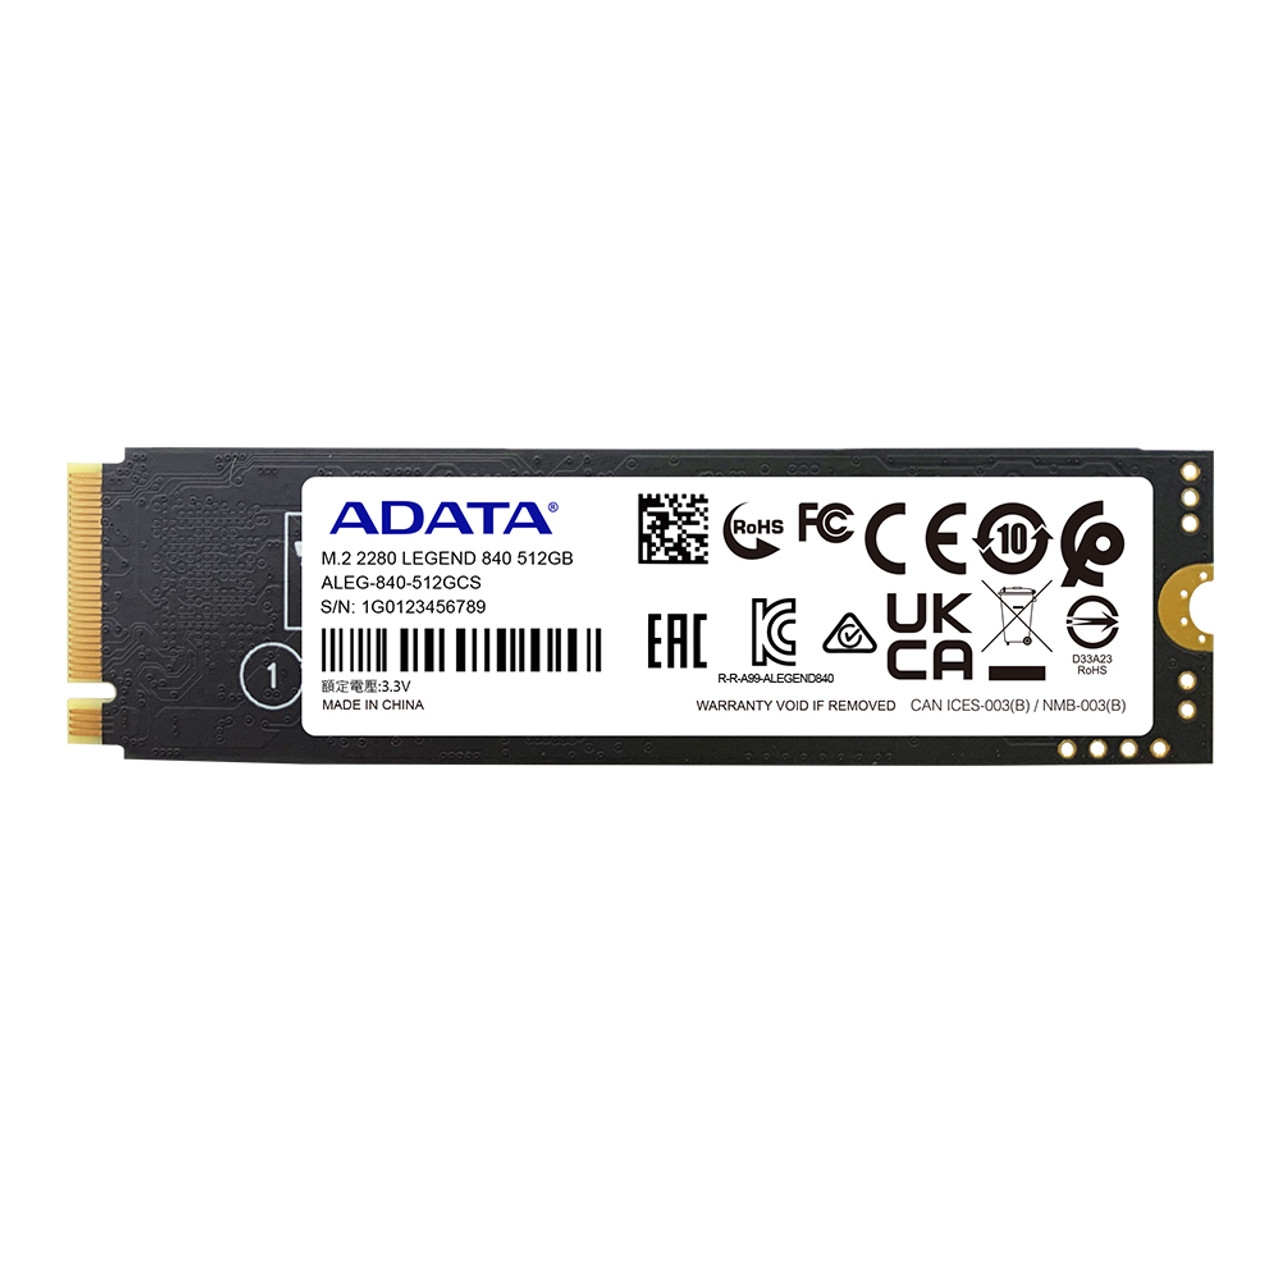 ADATA LEGEND 840 512GB M.2 2280 PCIe Gen4x4 Internal Solid State Drive |  PS5 Compatible - Innogrit IG5220 | Up to 5000 MBps - Grey/Gold SSD | 1PK -  ADATA